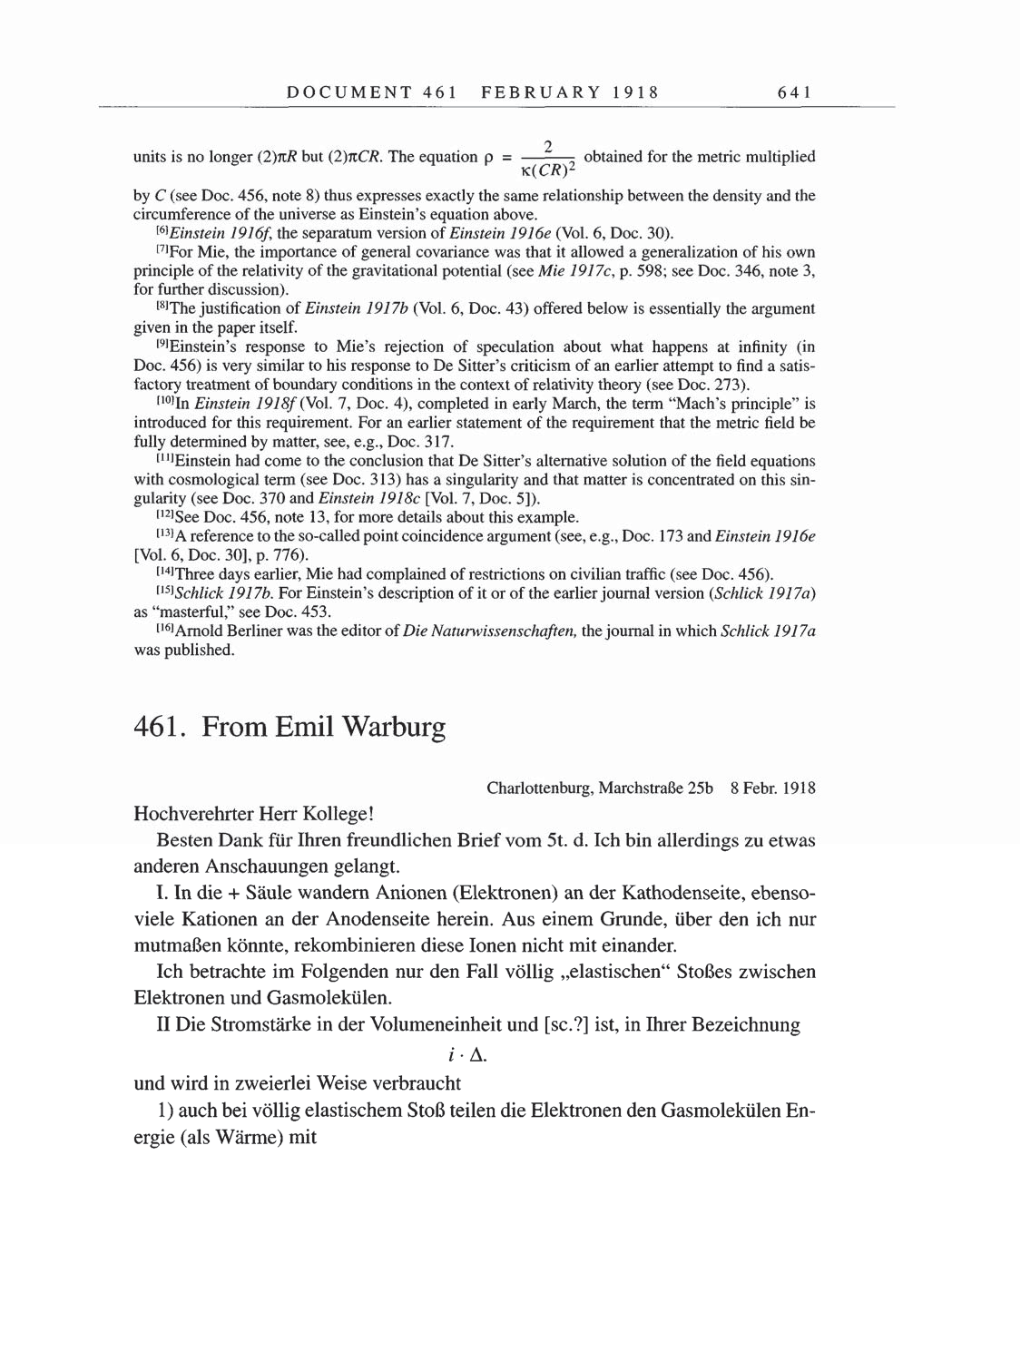 Volume 8, Part B: The Berlin Years: Correspondence 1918 page 641